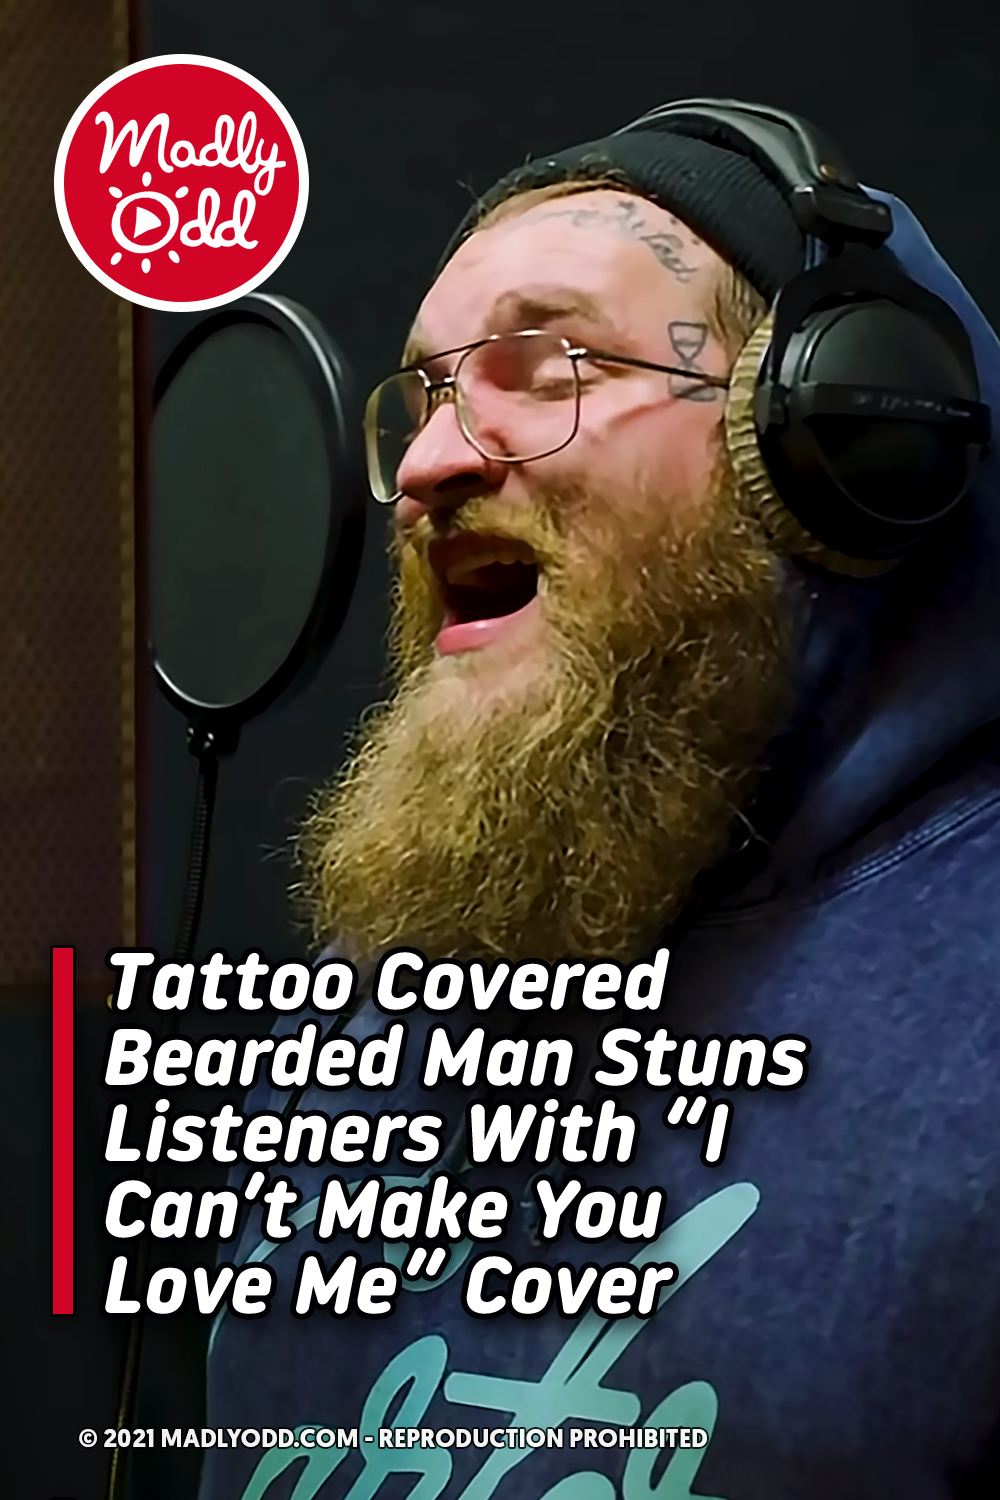 Tattoo Covered Bearded Man Stuns Listeners With “I Can’t Make You Love Me” Cover